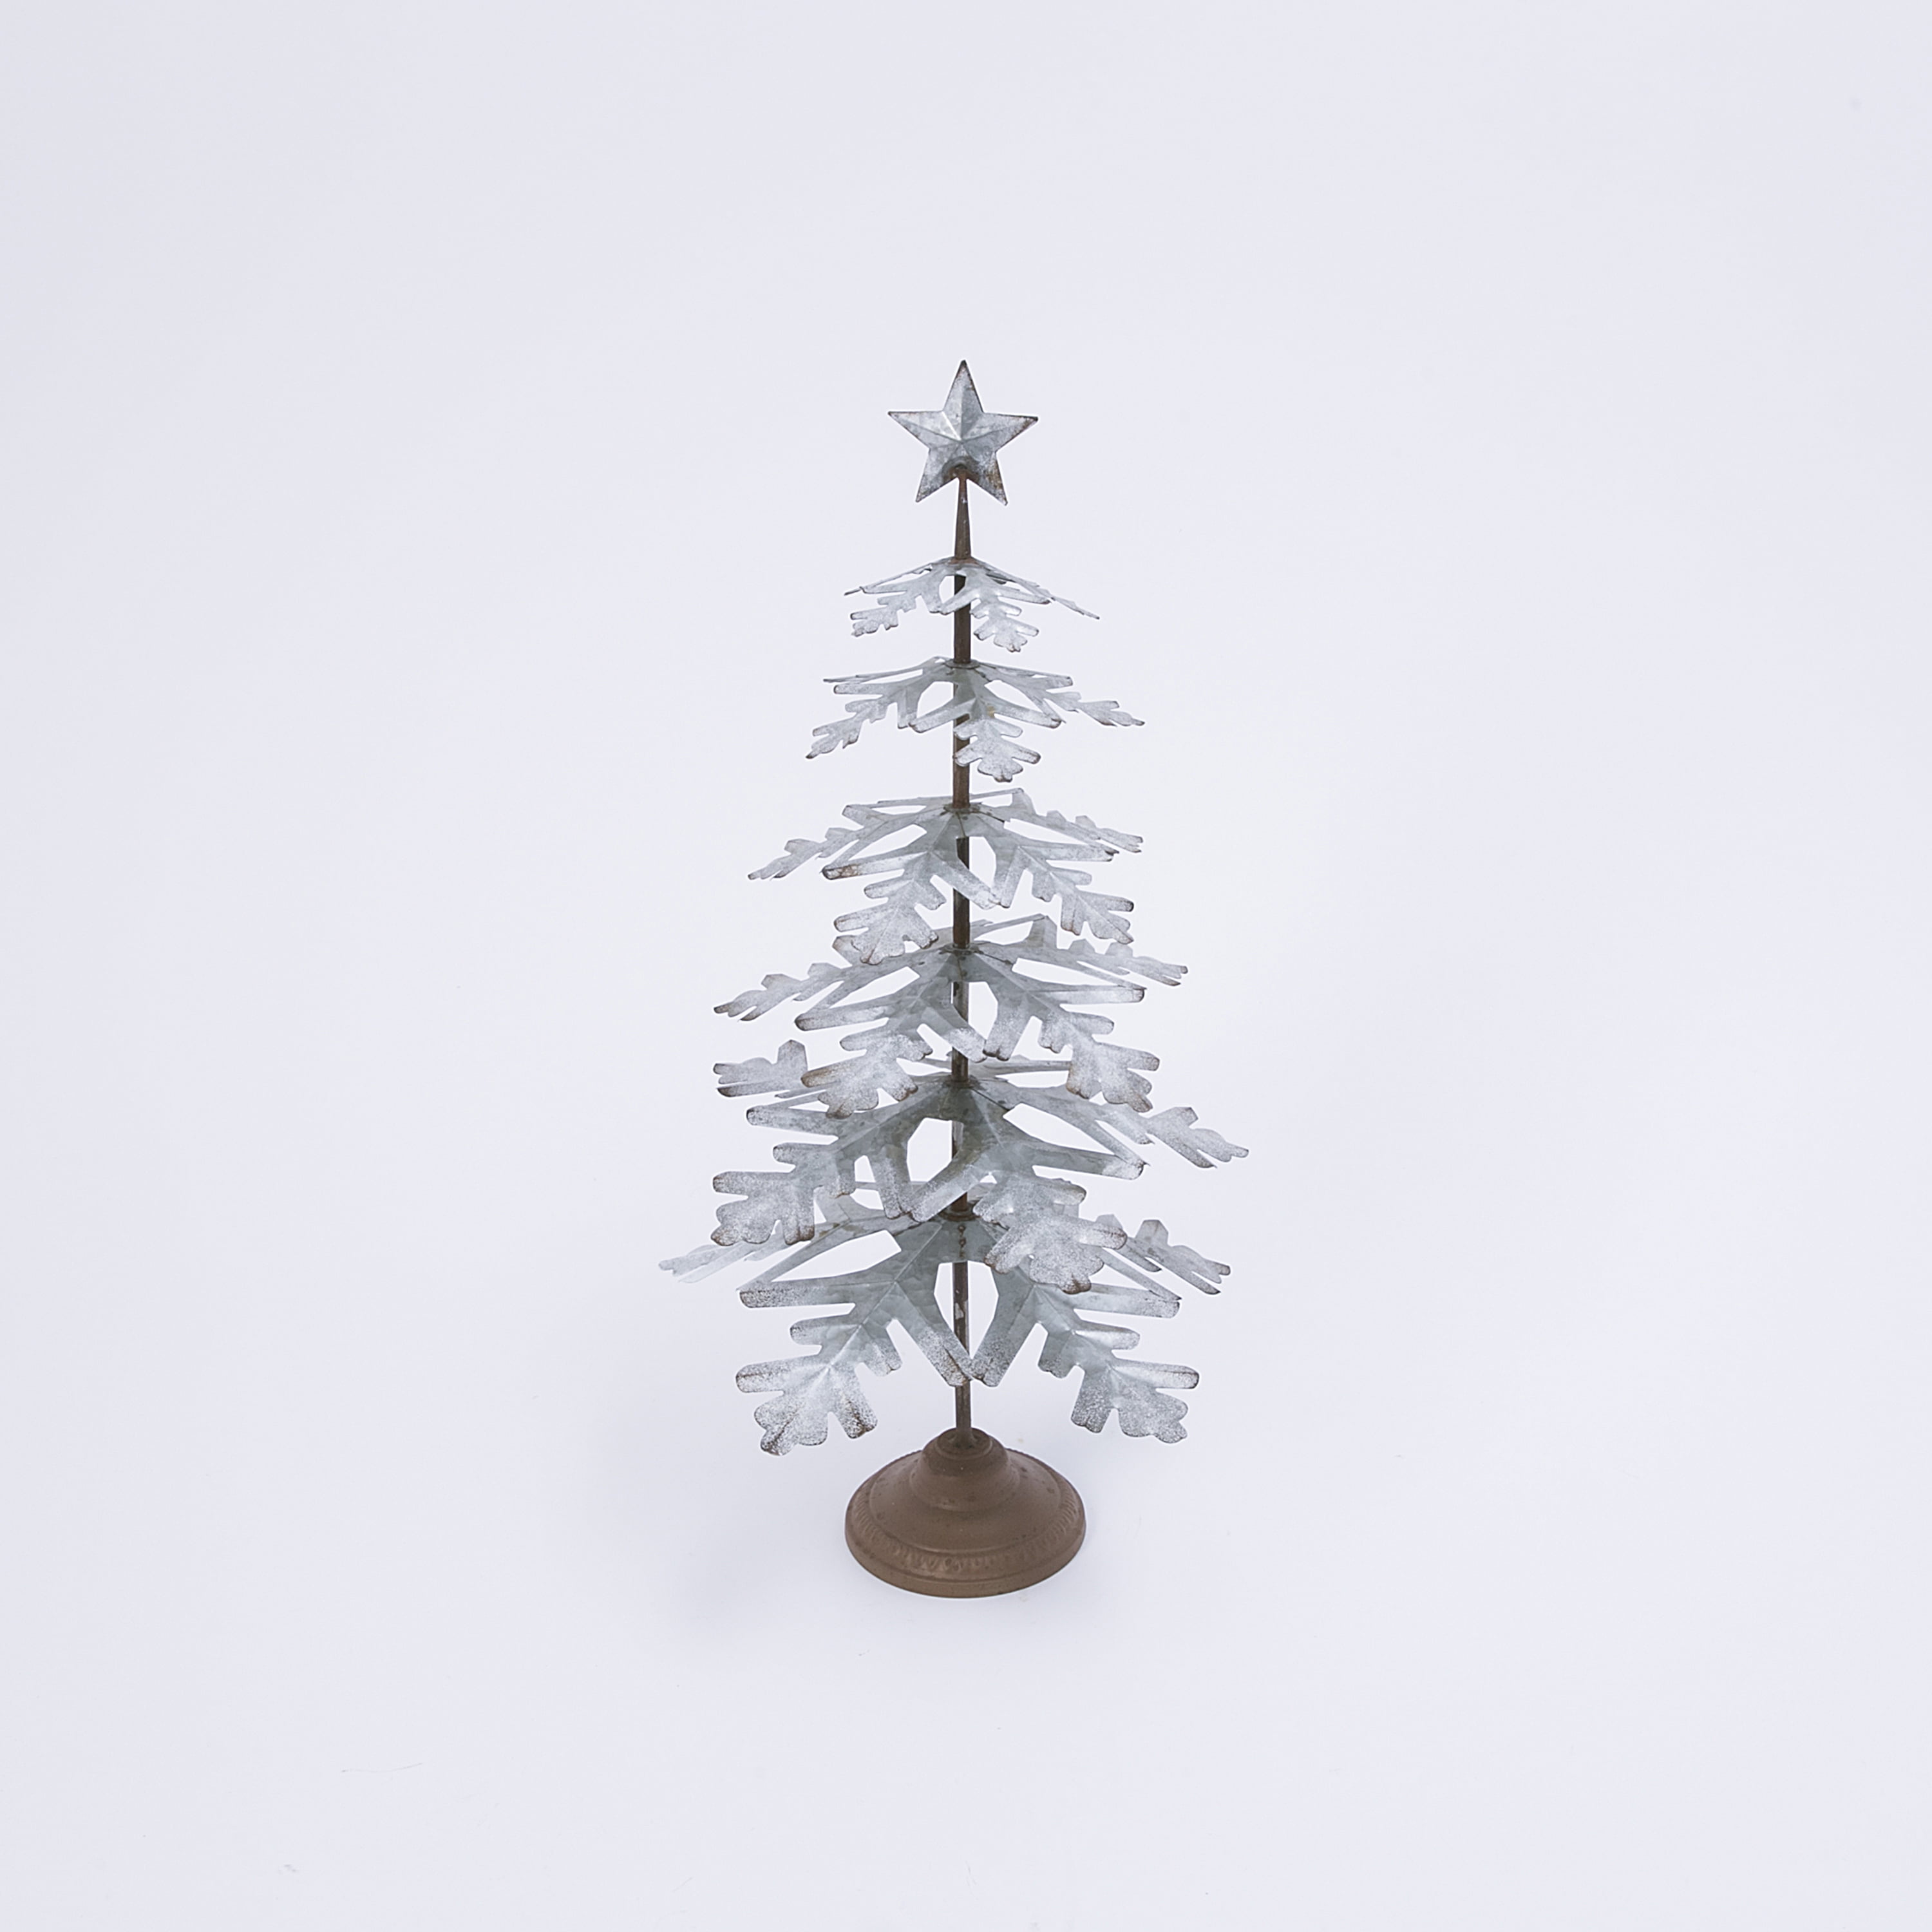 Gerson 27.8-Inch High Galvanized Metal Tabletop Evergreen Tree with ...